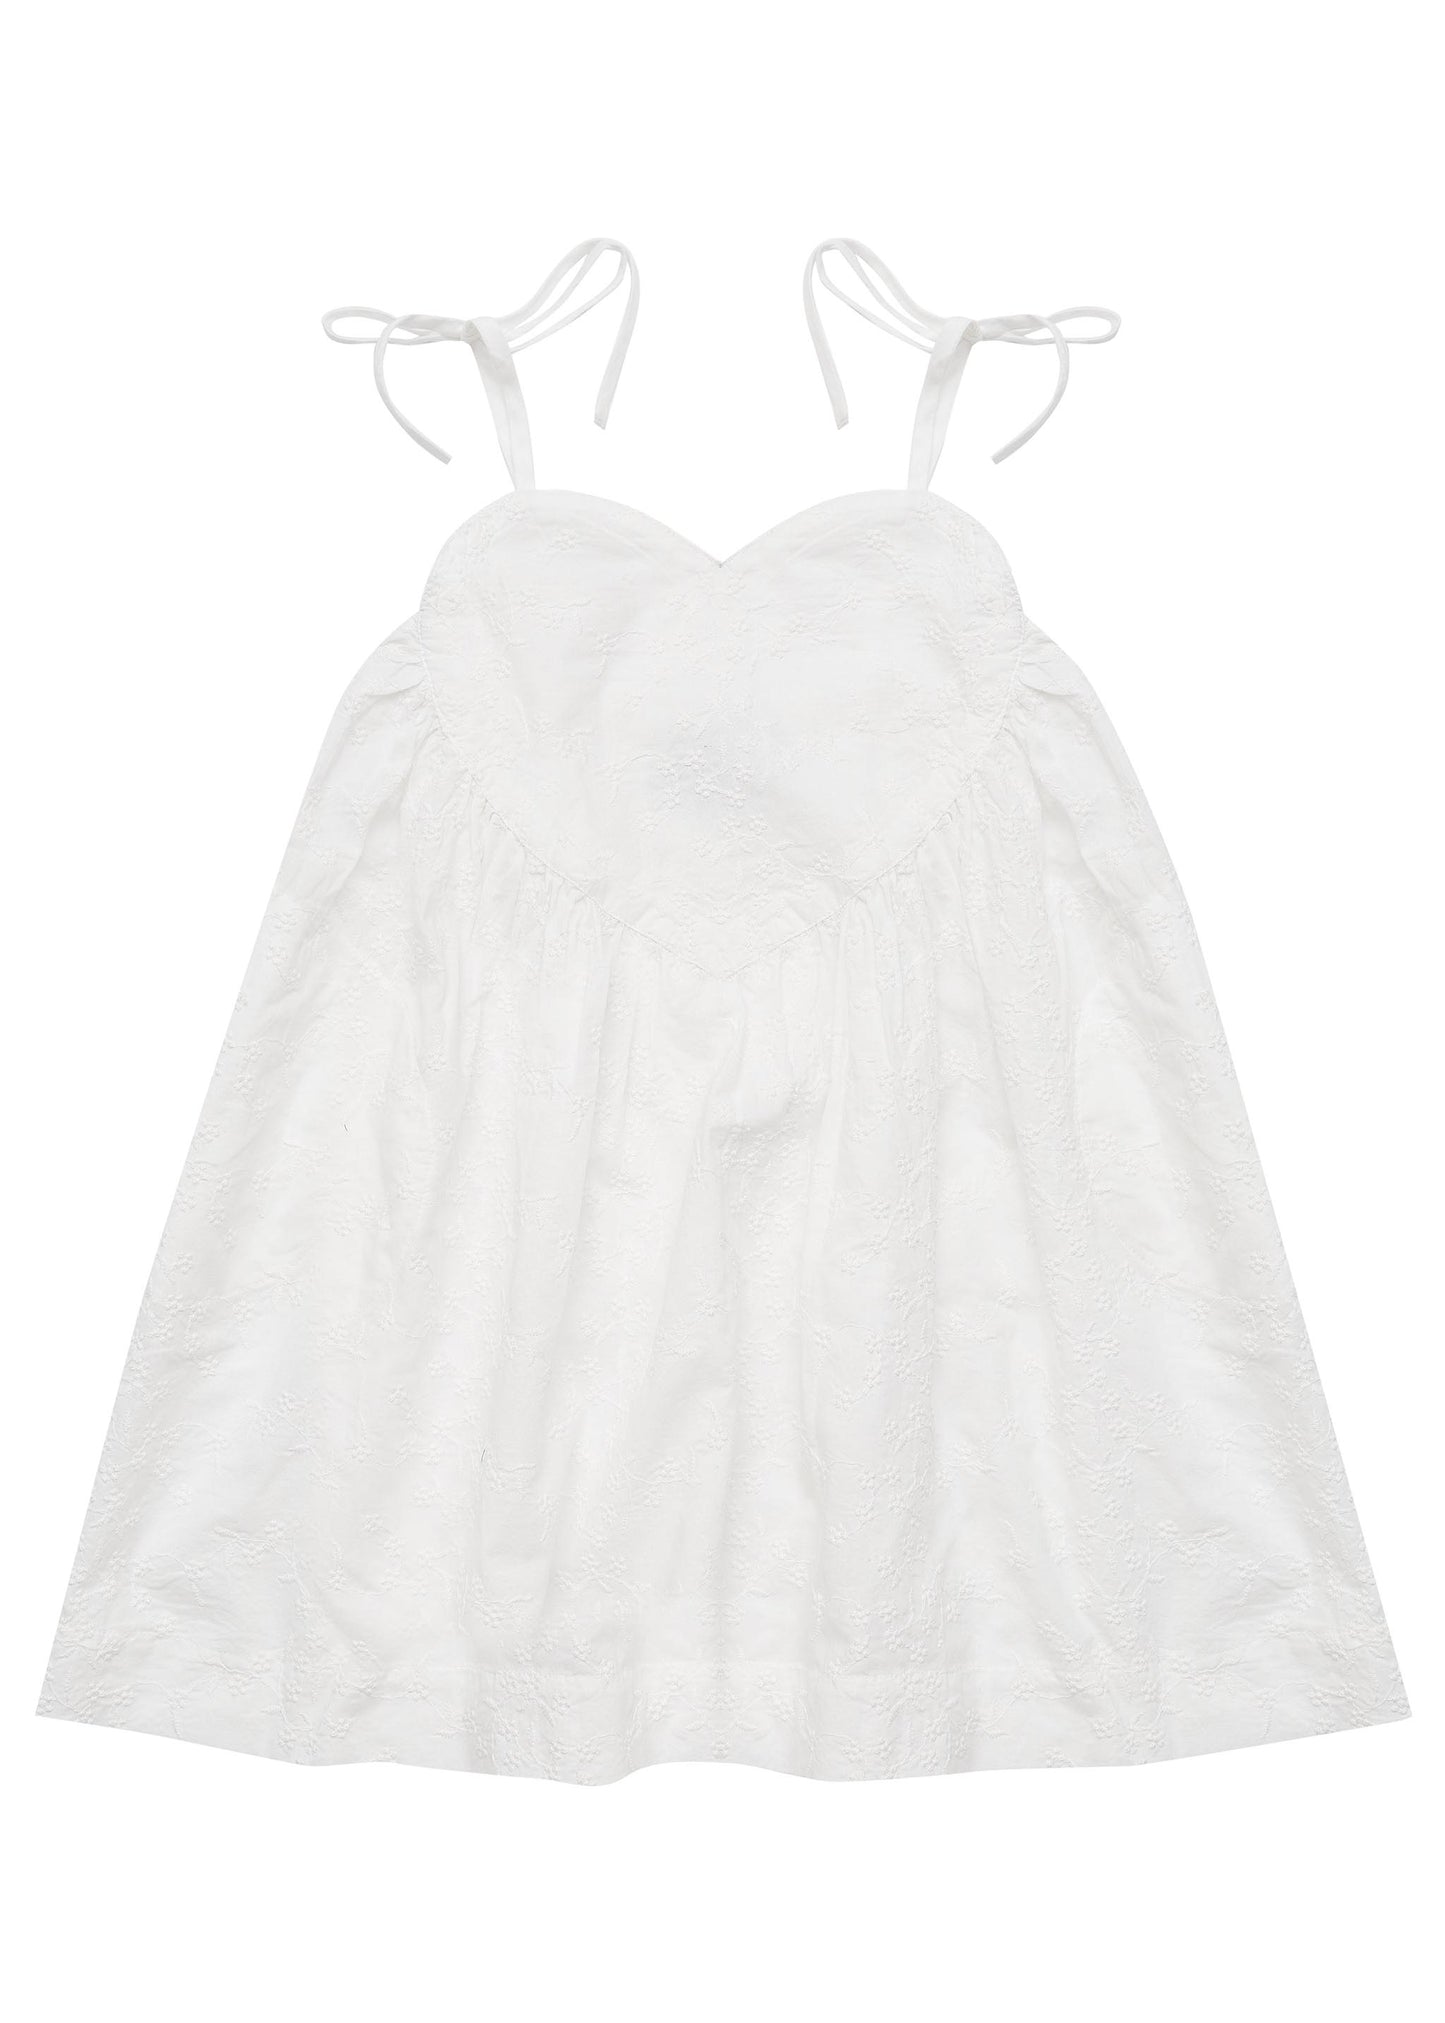 Bella and Lace White Rose Dress Coconut Blossom